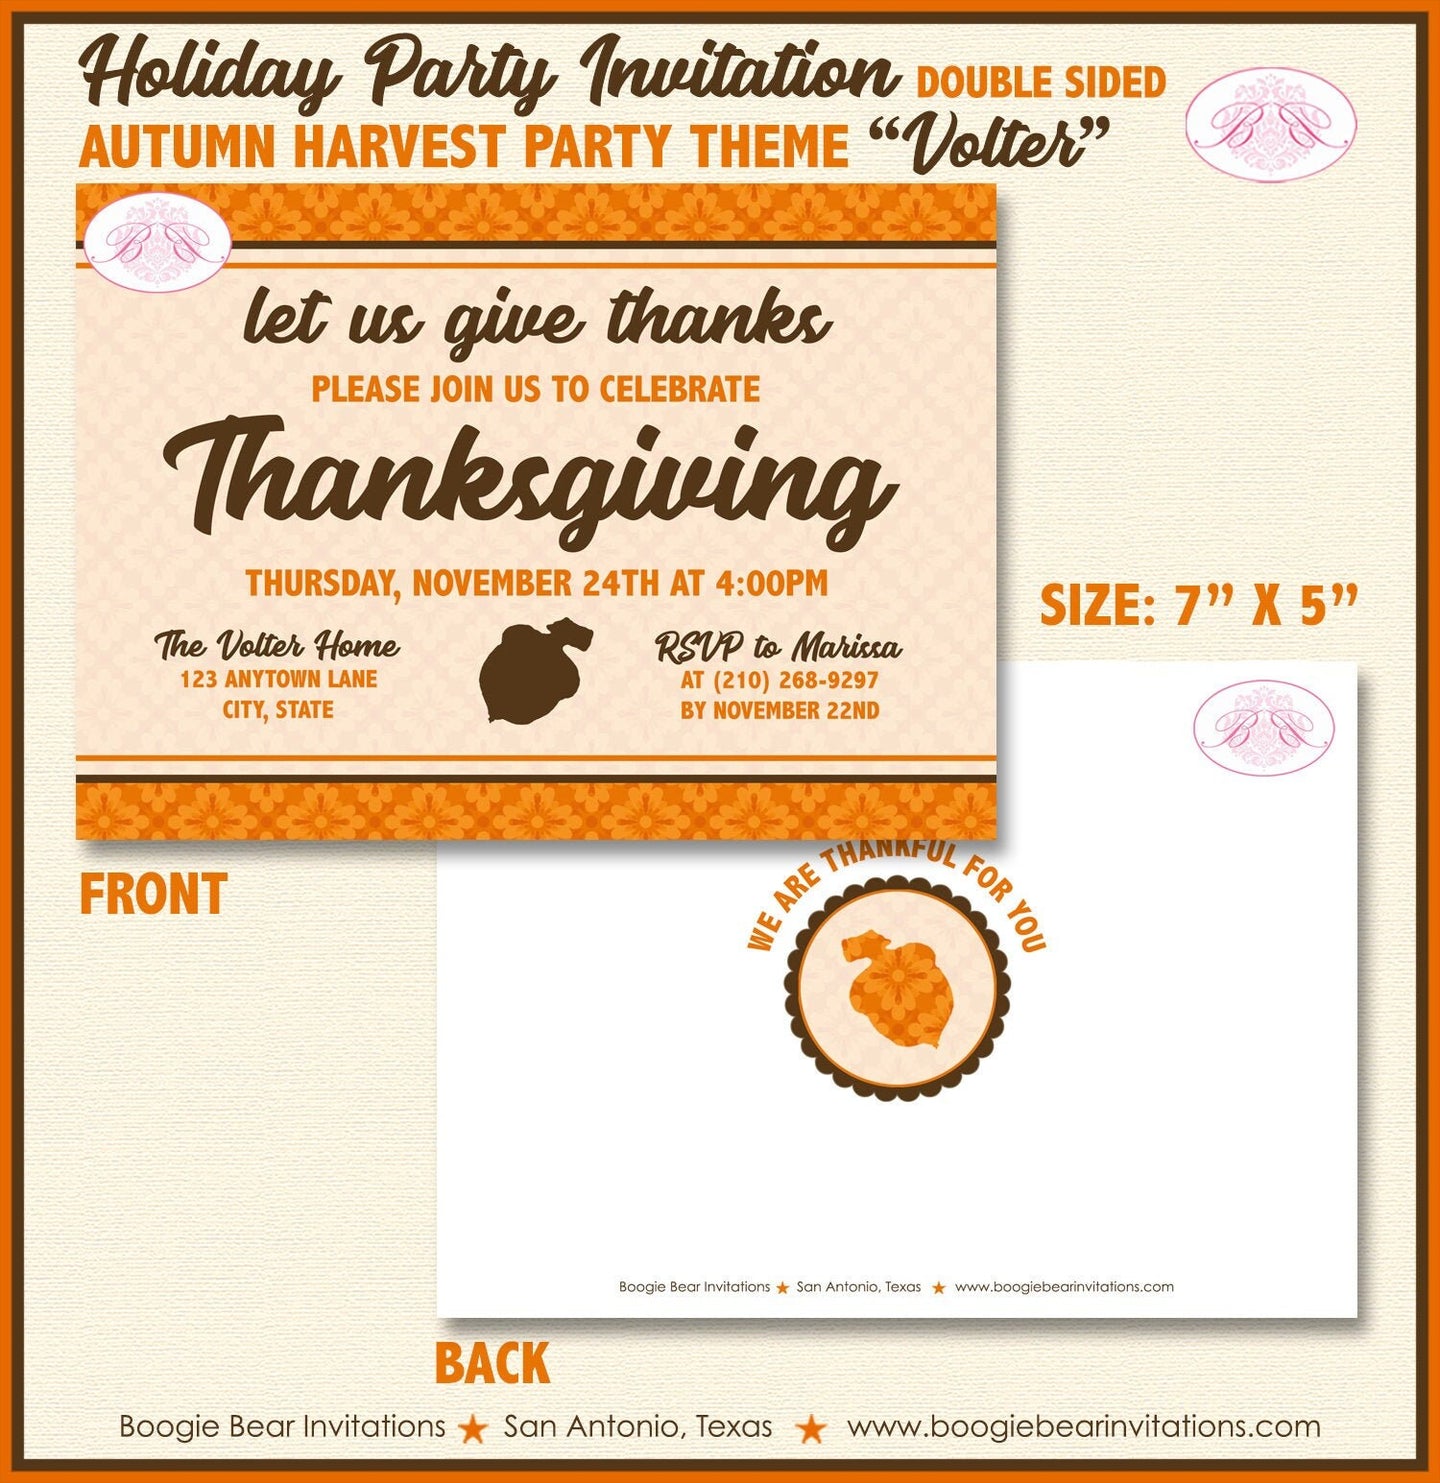 Thanksgiving Dinner Party Invitation Autumn Fall Harvest Brown Orange Retro Boogie Bear Invitations Volter Theme Paperless Printable Printed